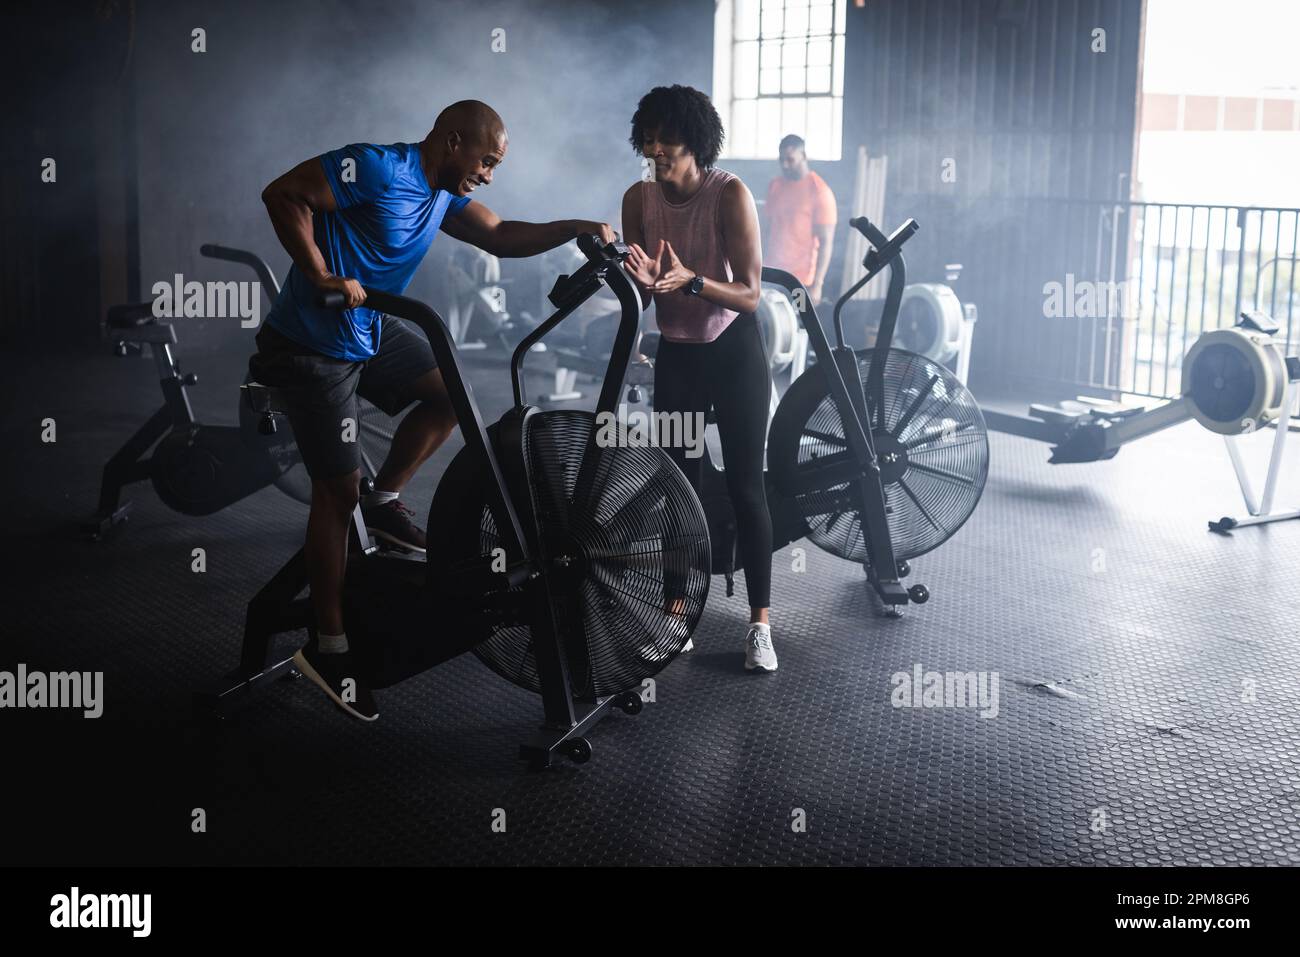 Biracial young woman clapping hands and cheering male friend cycling on exercise bike in gym Stock Photo